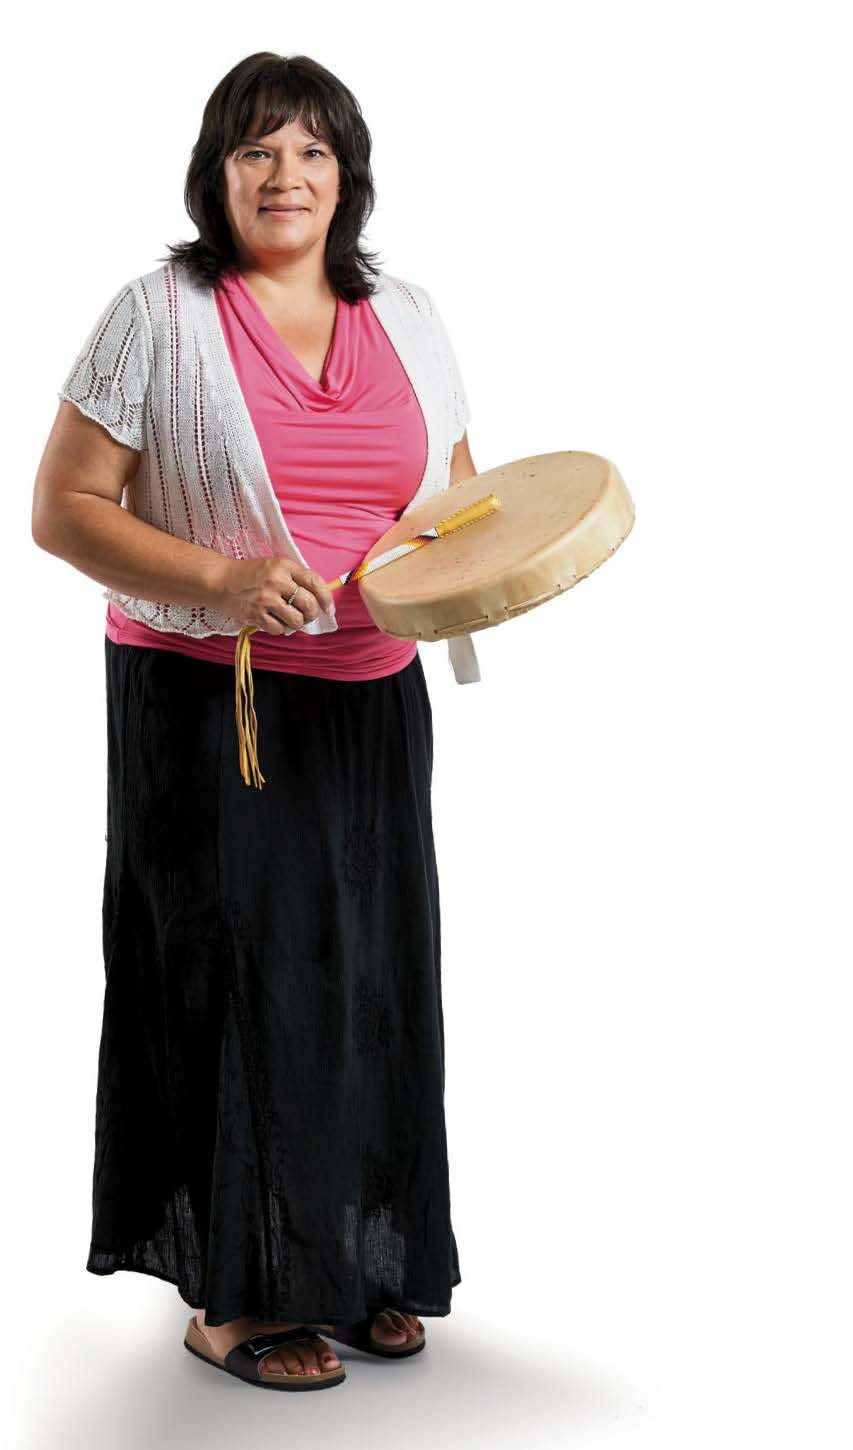 Debbie Debassige standing. Debbie is holding a drum in one hand and an ornate drumstick in the other. 